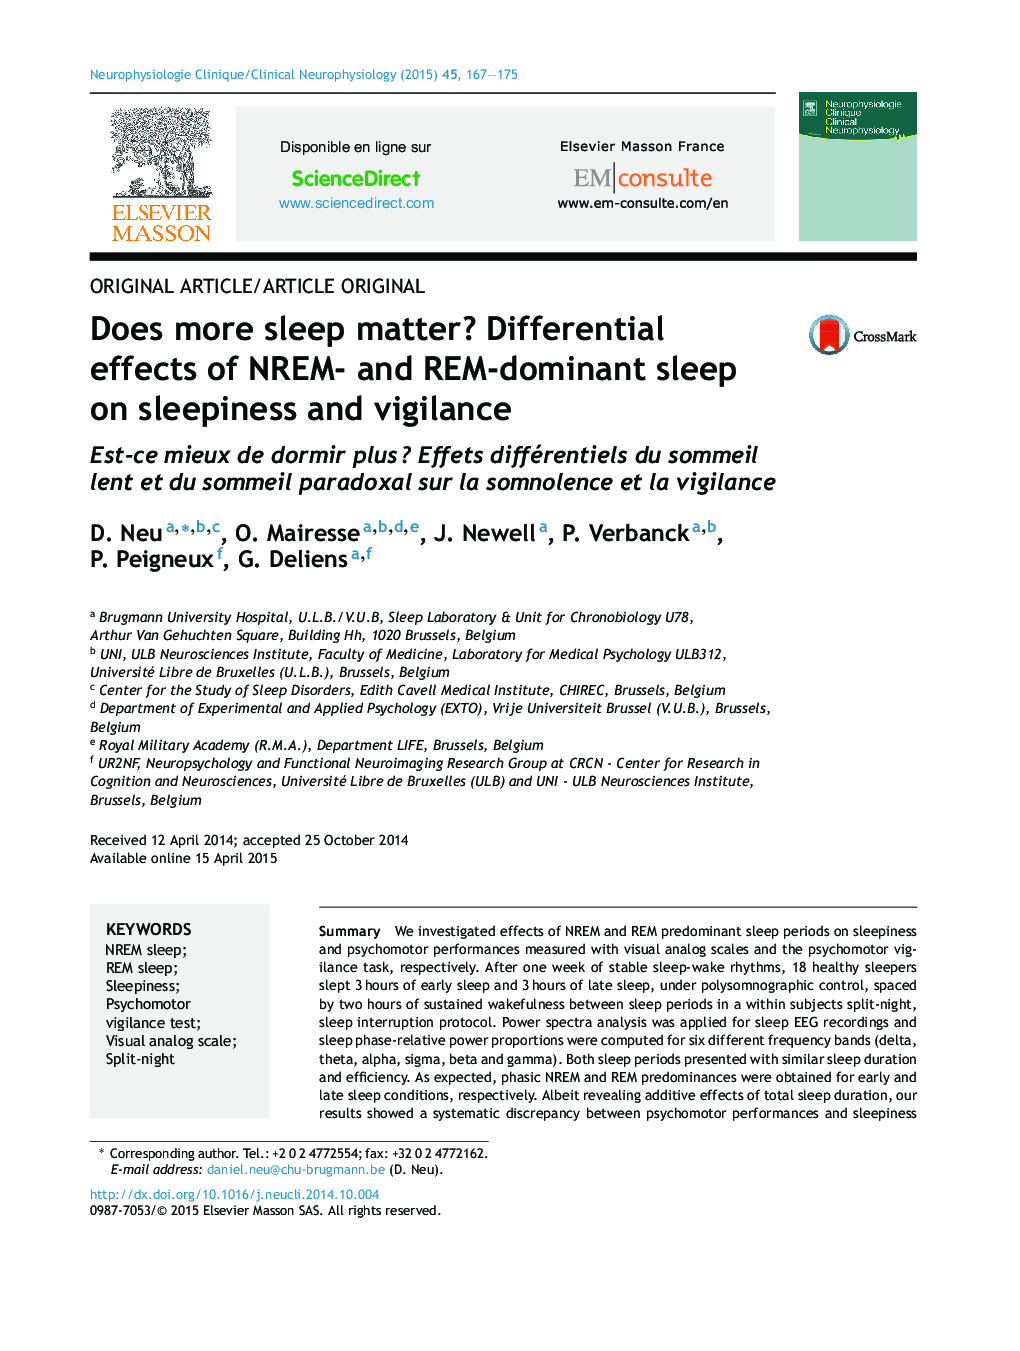 Does more sleep matter? Differential effects of NREM- and REM-dominant sleep on sleepiness and vigilance